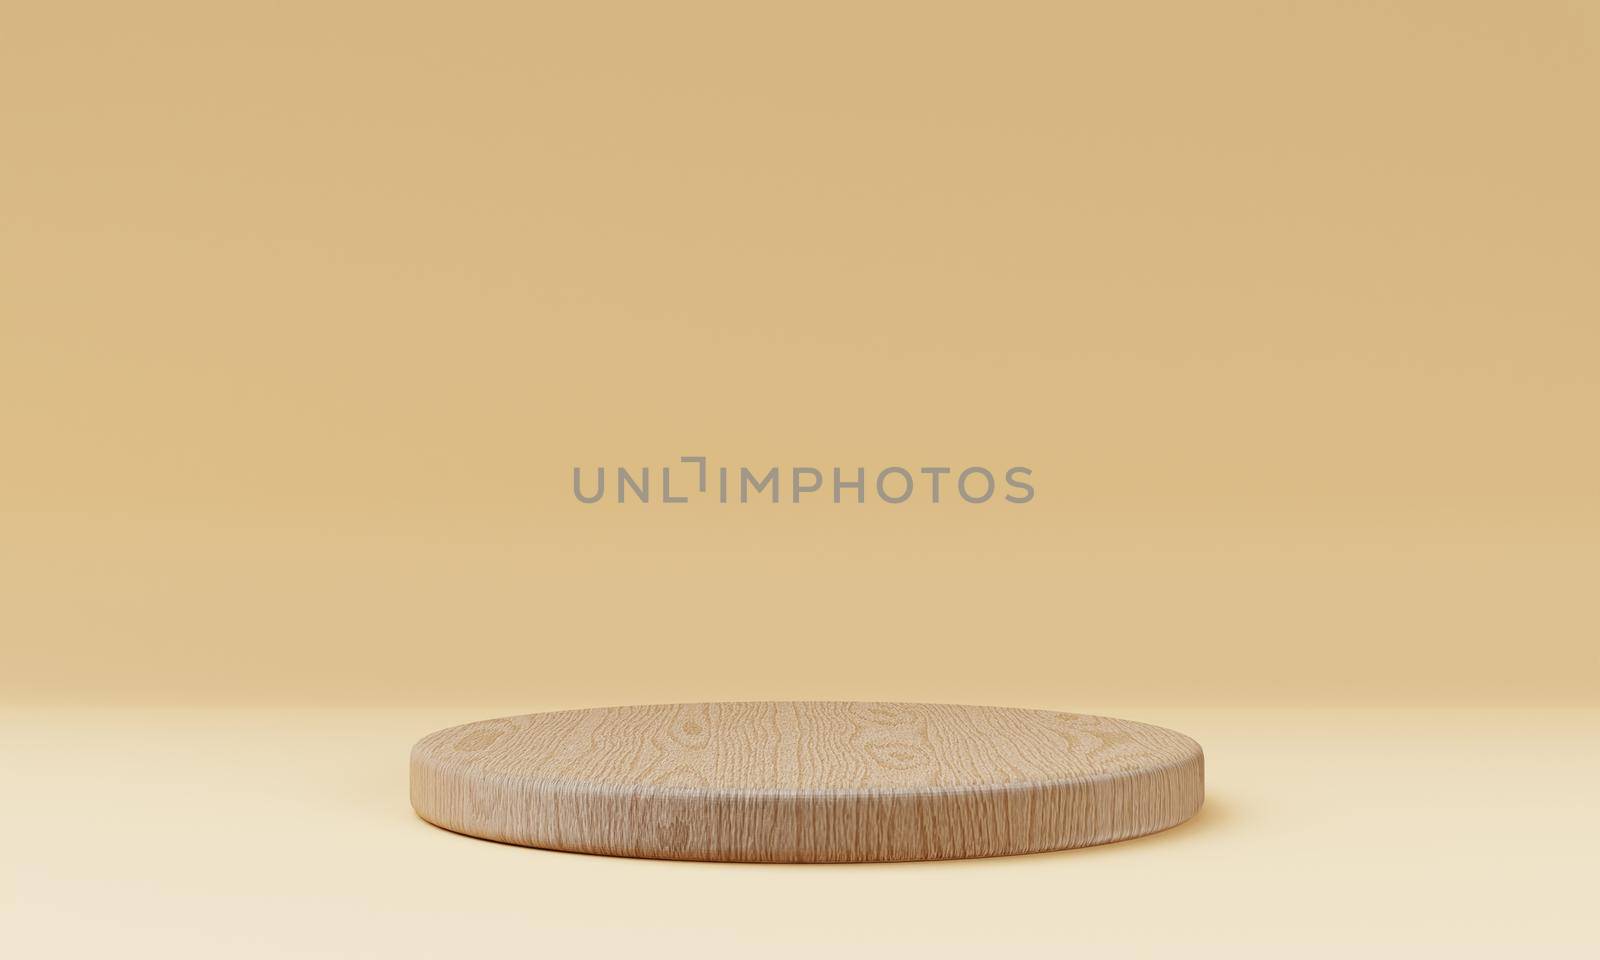 One brown wooden round cylinder product stage podium on orange background. Minimal fashion theme. Geometry exhibition stage mockup concept. 3D illustration rendering